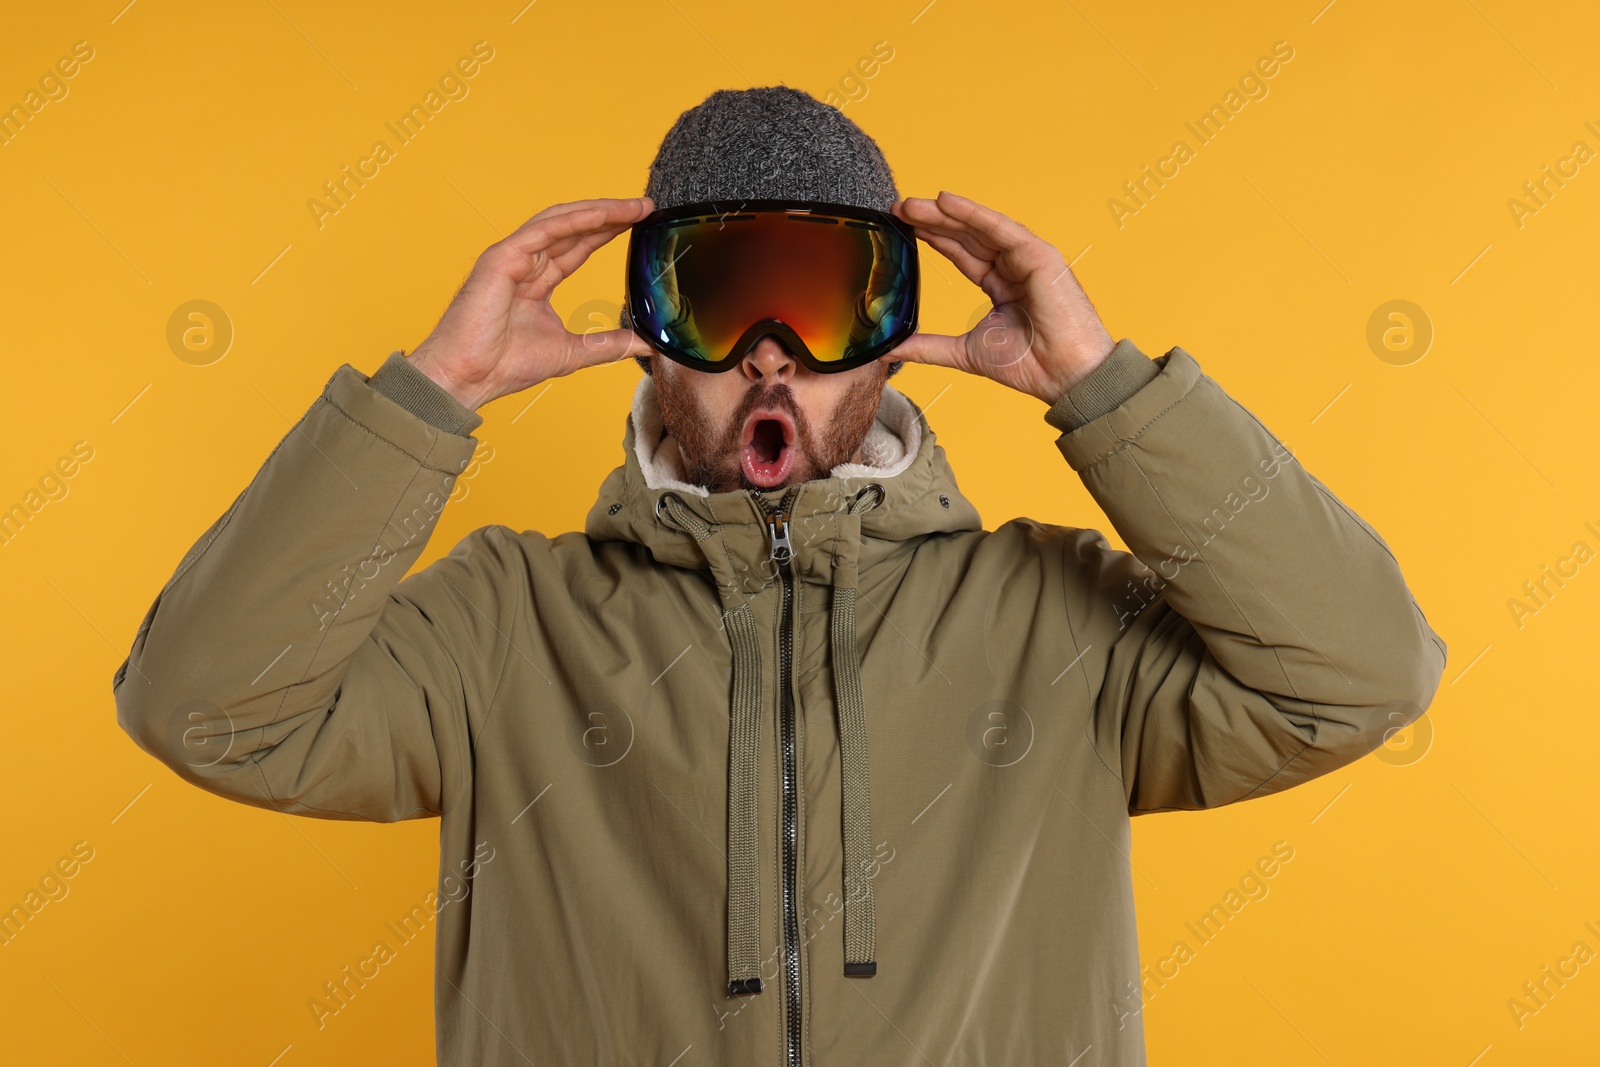 Photo of Winter sports. Emotional man in ski suit and goggles on orange background